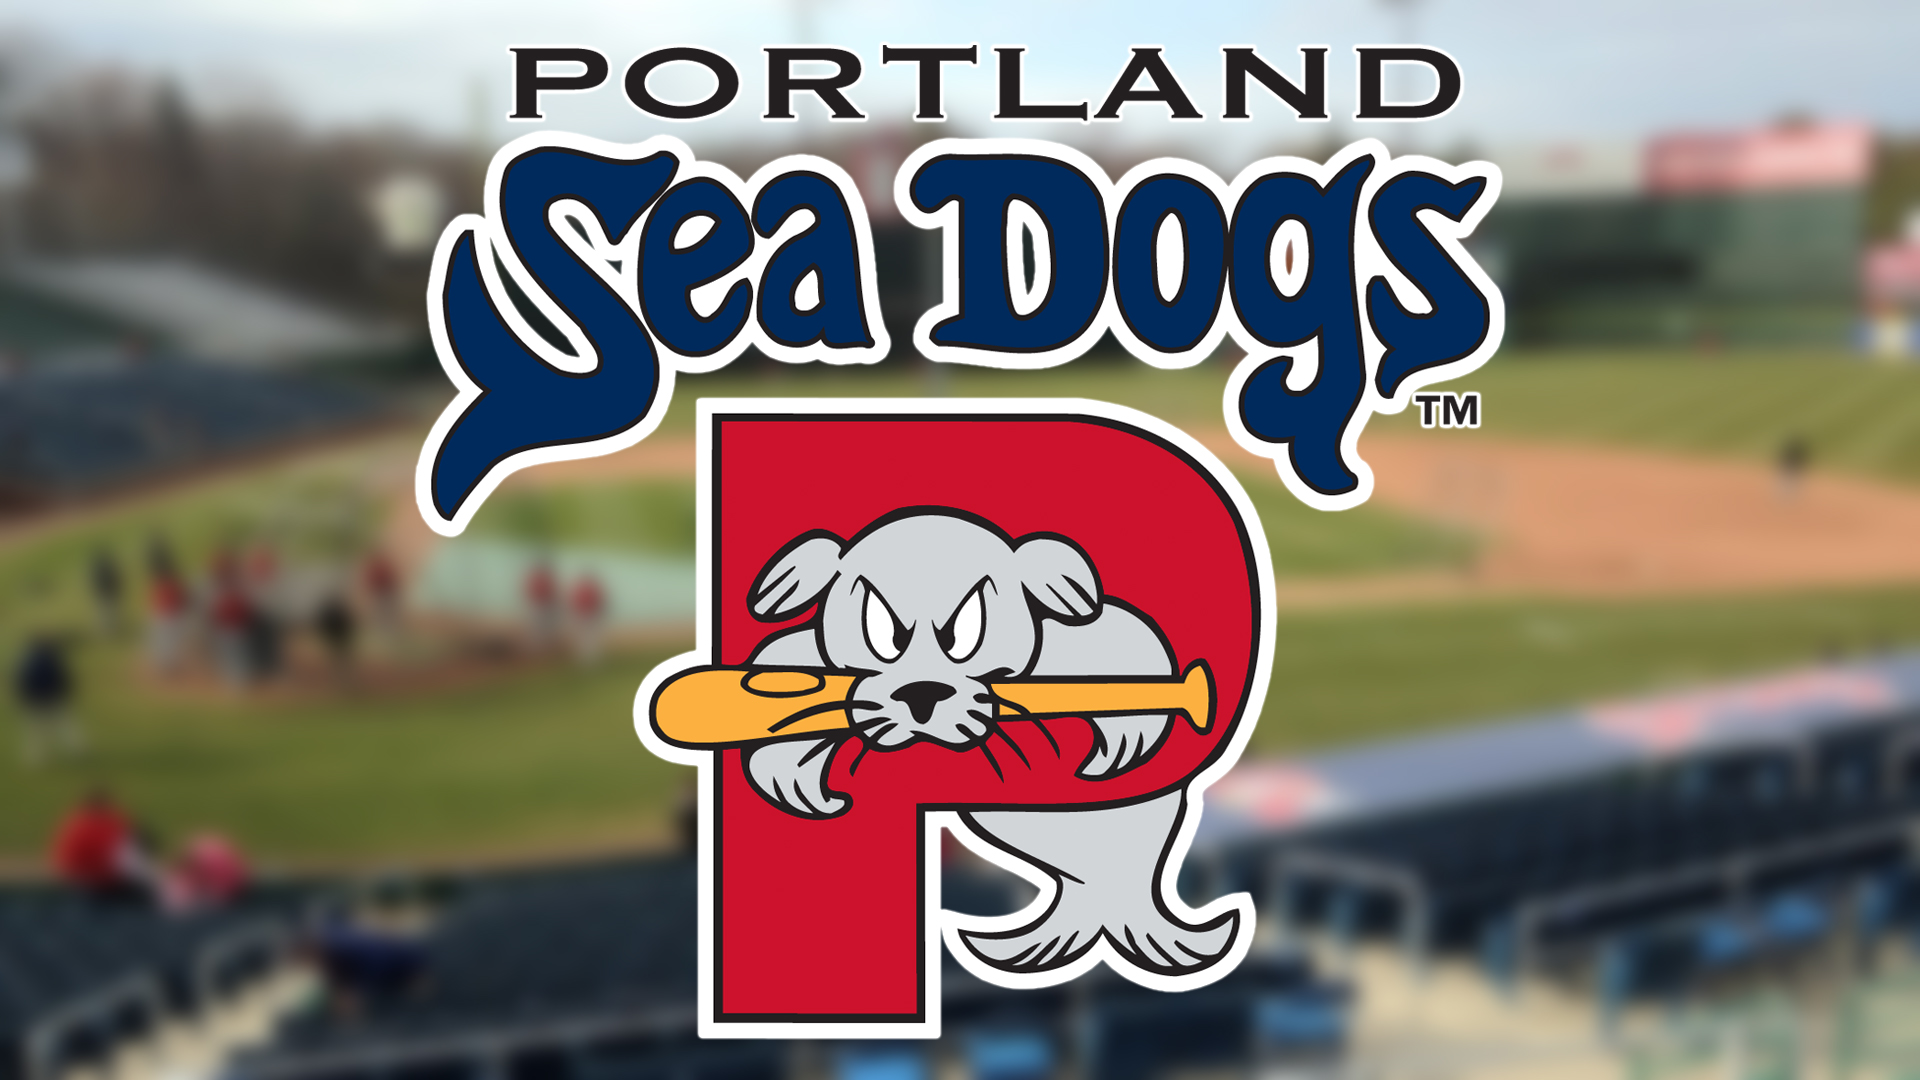 There's a story behind the Sea Dogs name and logo